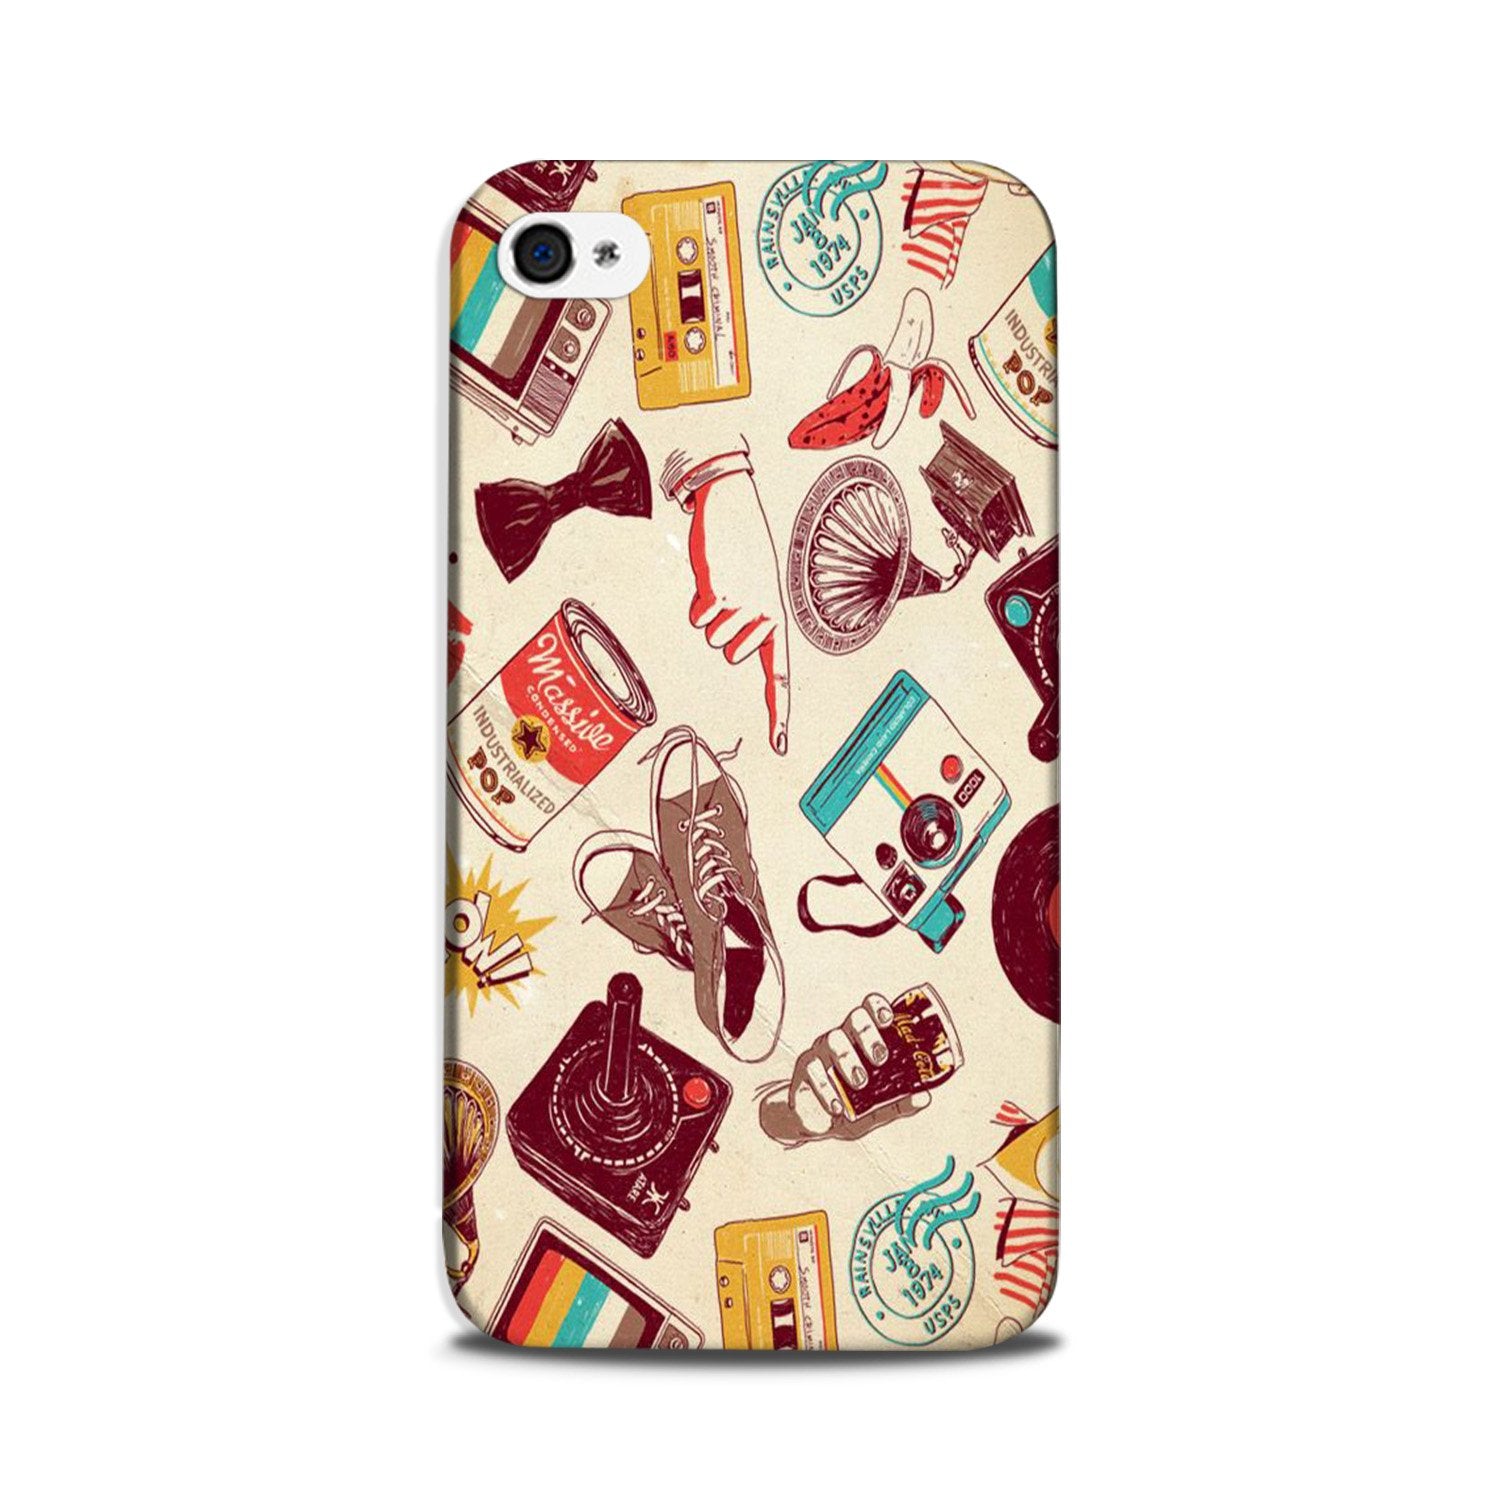 Vintage Case for iPhone 5/ 5s